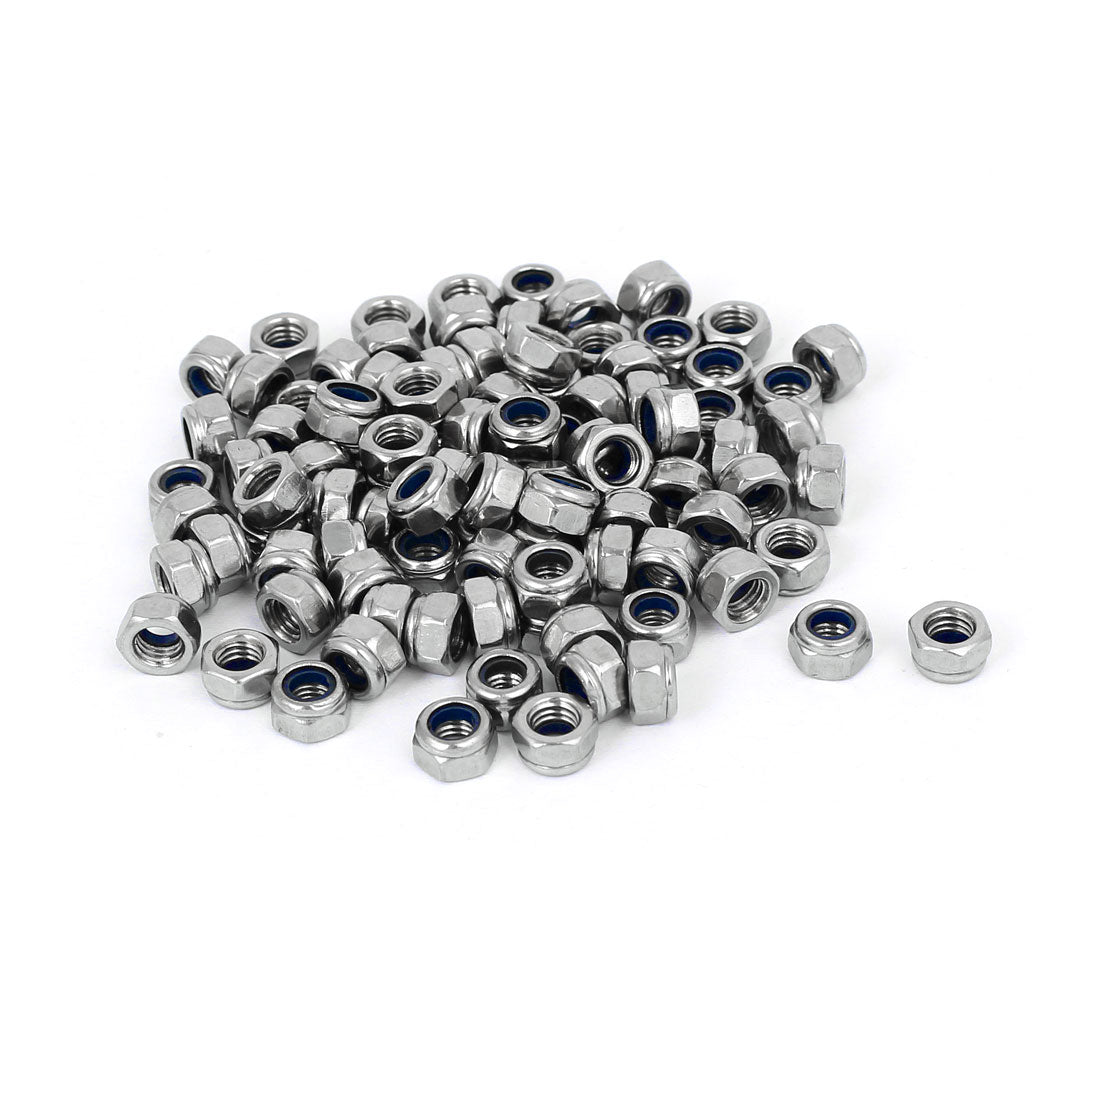 uxcell Uxcell M5 x 0.8mm 304 Stainless Steel Nylon Insert Hex Lock Locking Nut 100PCS